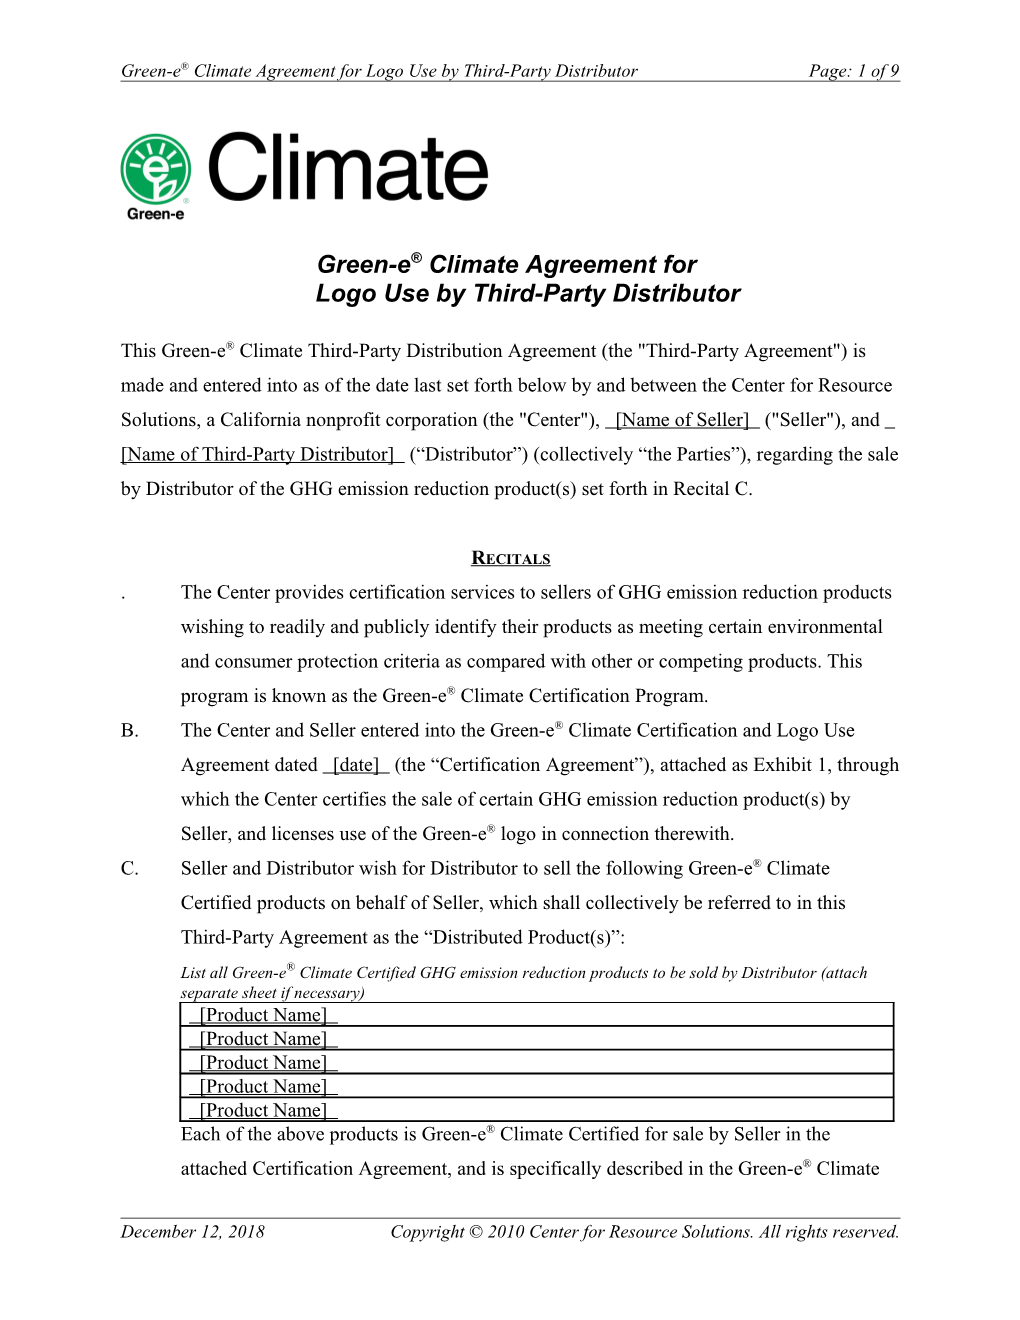 Green-E Climate Agreement for Logo Use by Third-Party Distributor